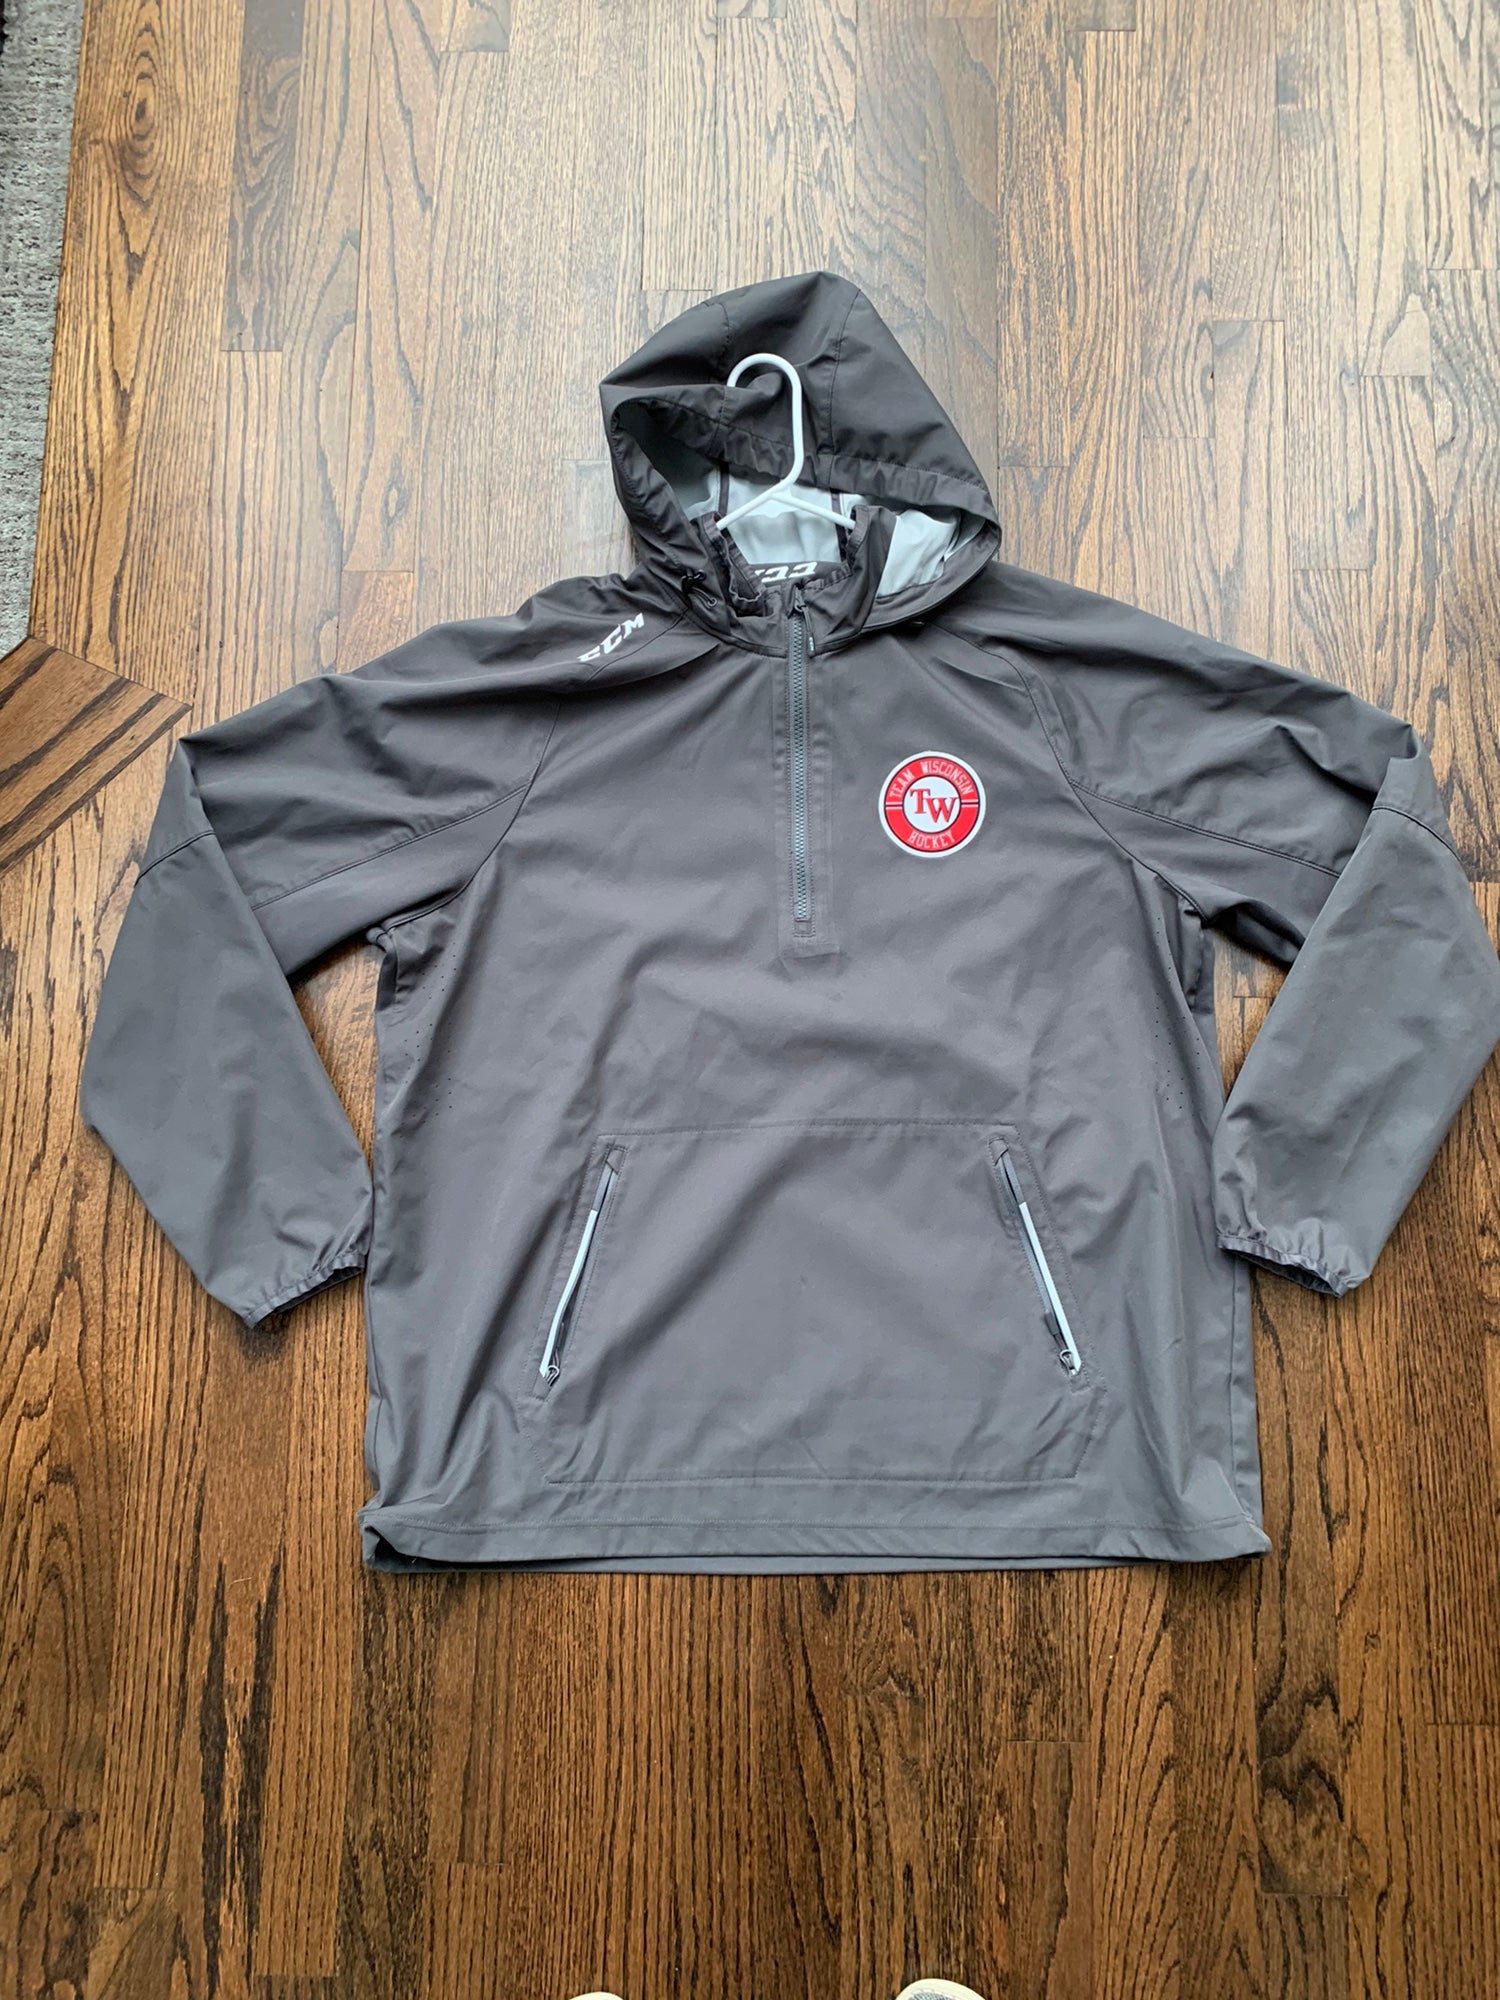 NEW - CCM Puffer Jacket. Thinsulate. Team Wisconsin Size XL